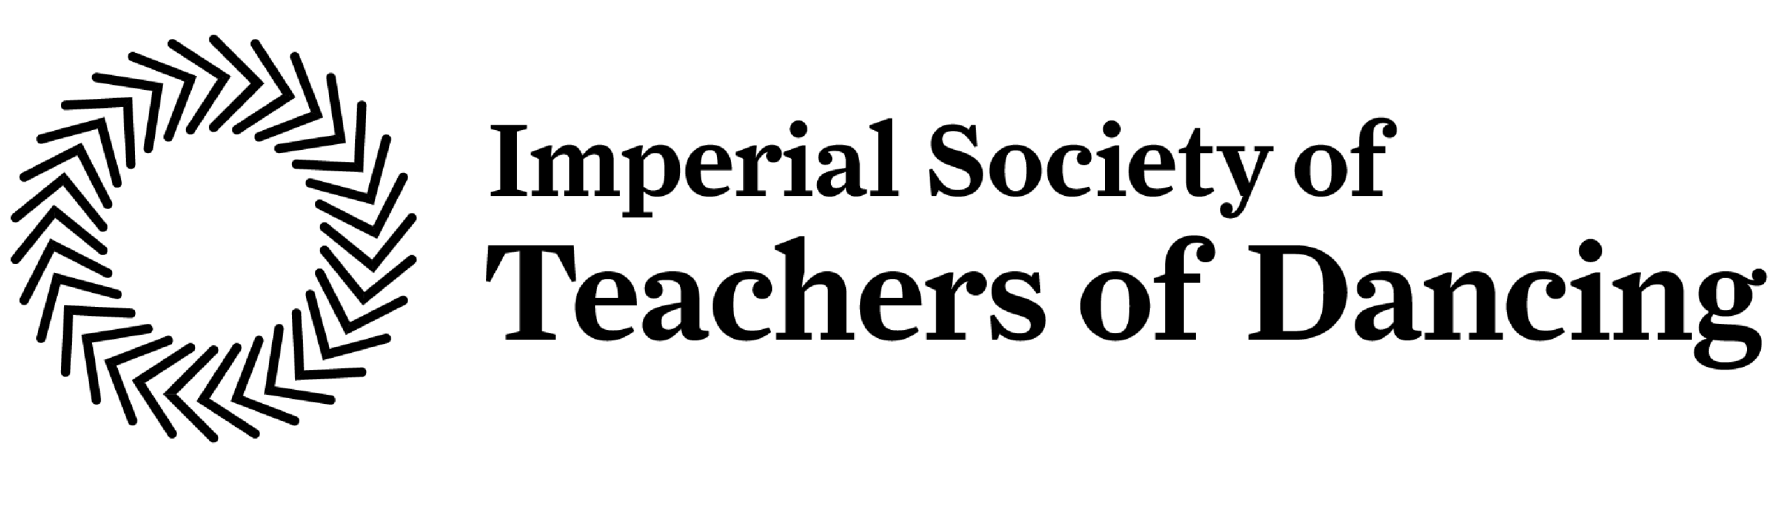 the logo for the imperial society of teachers of dancing